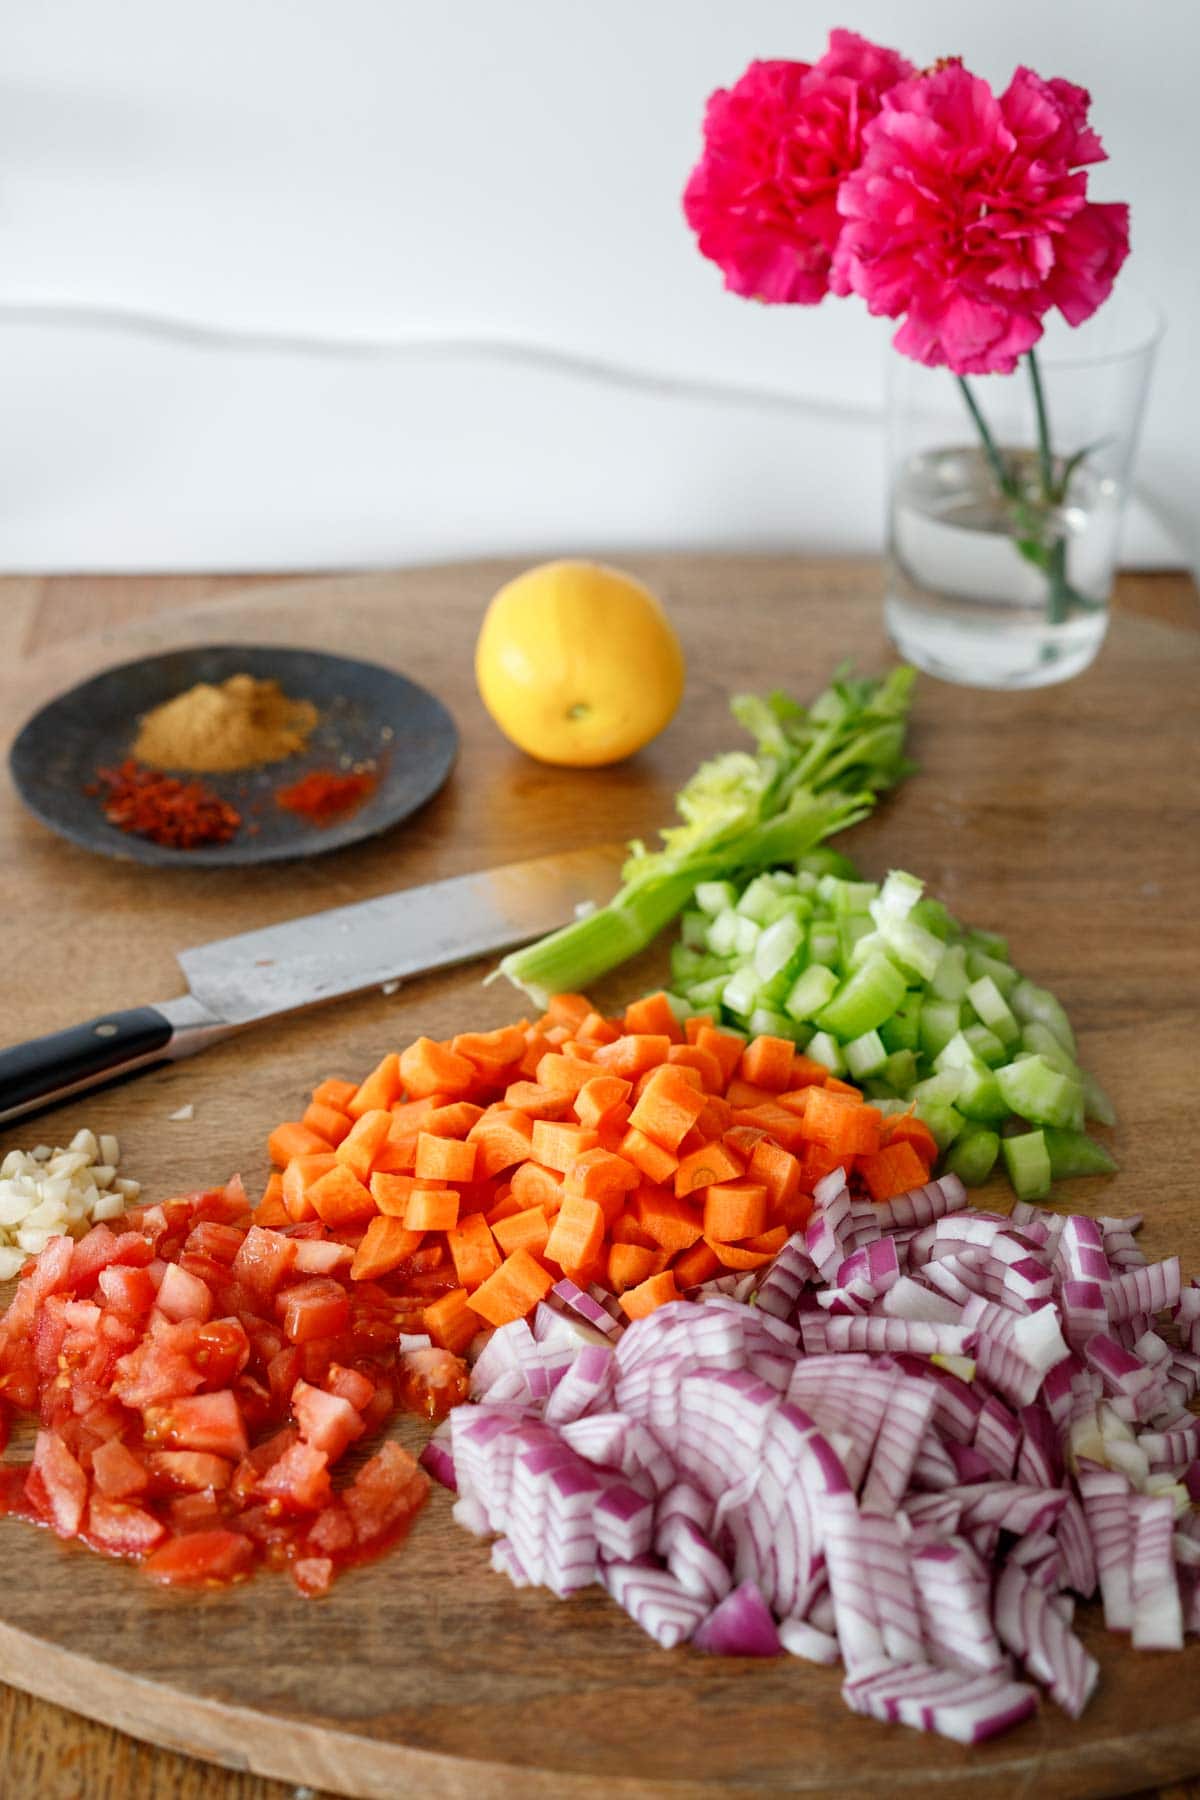 diced red onion, tomato, garlic, carrots, celery on wood board.